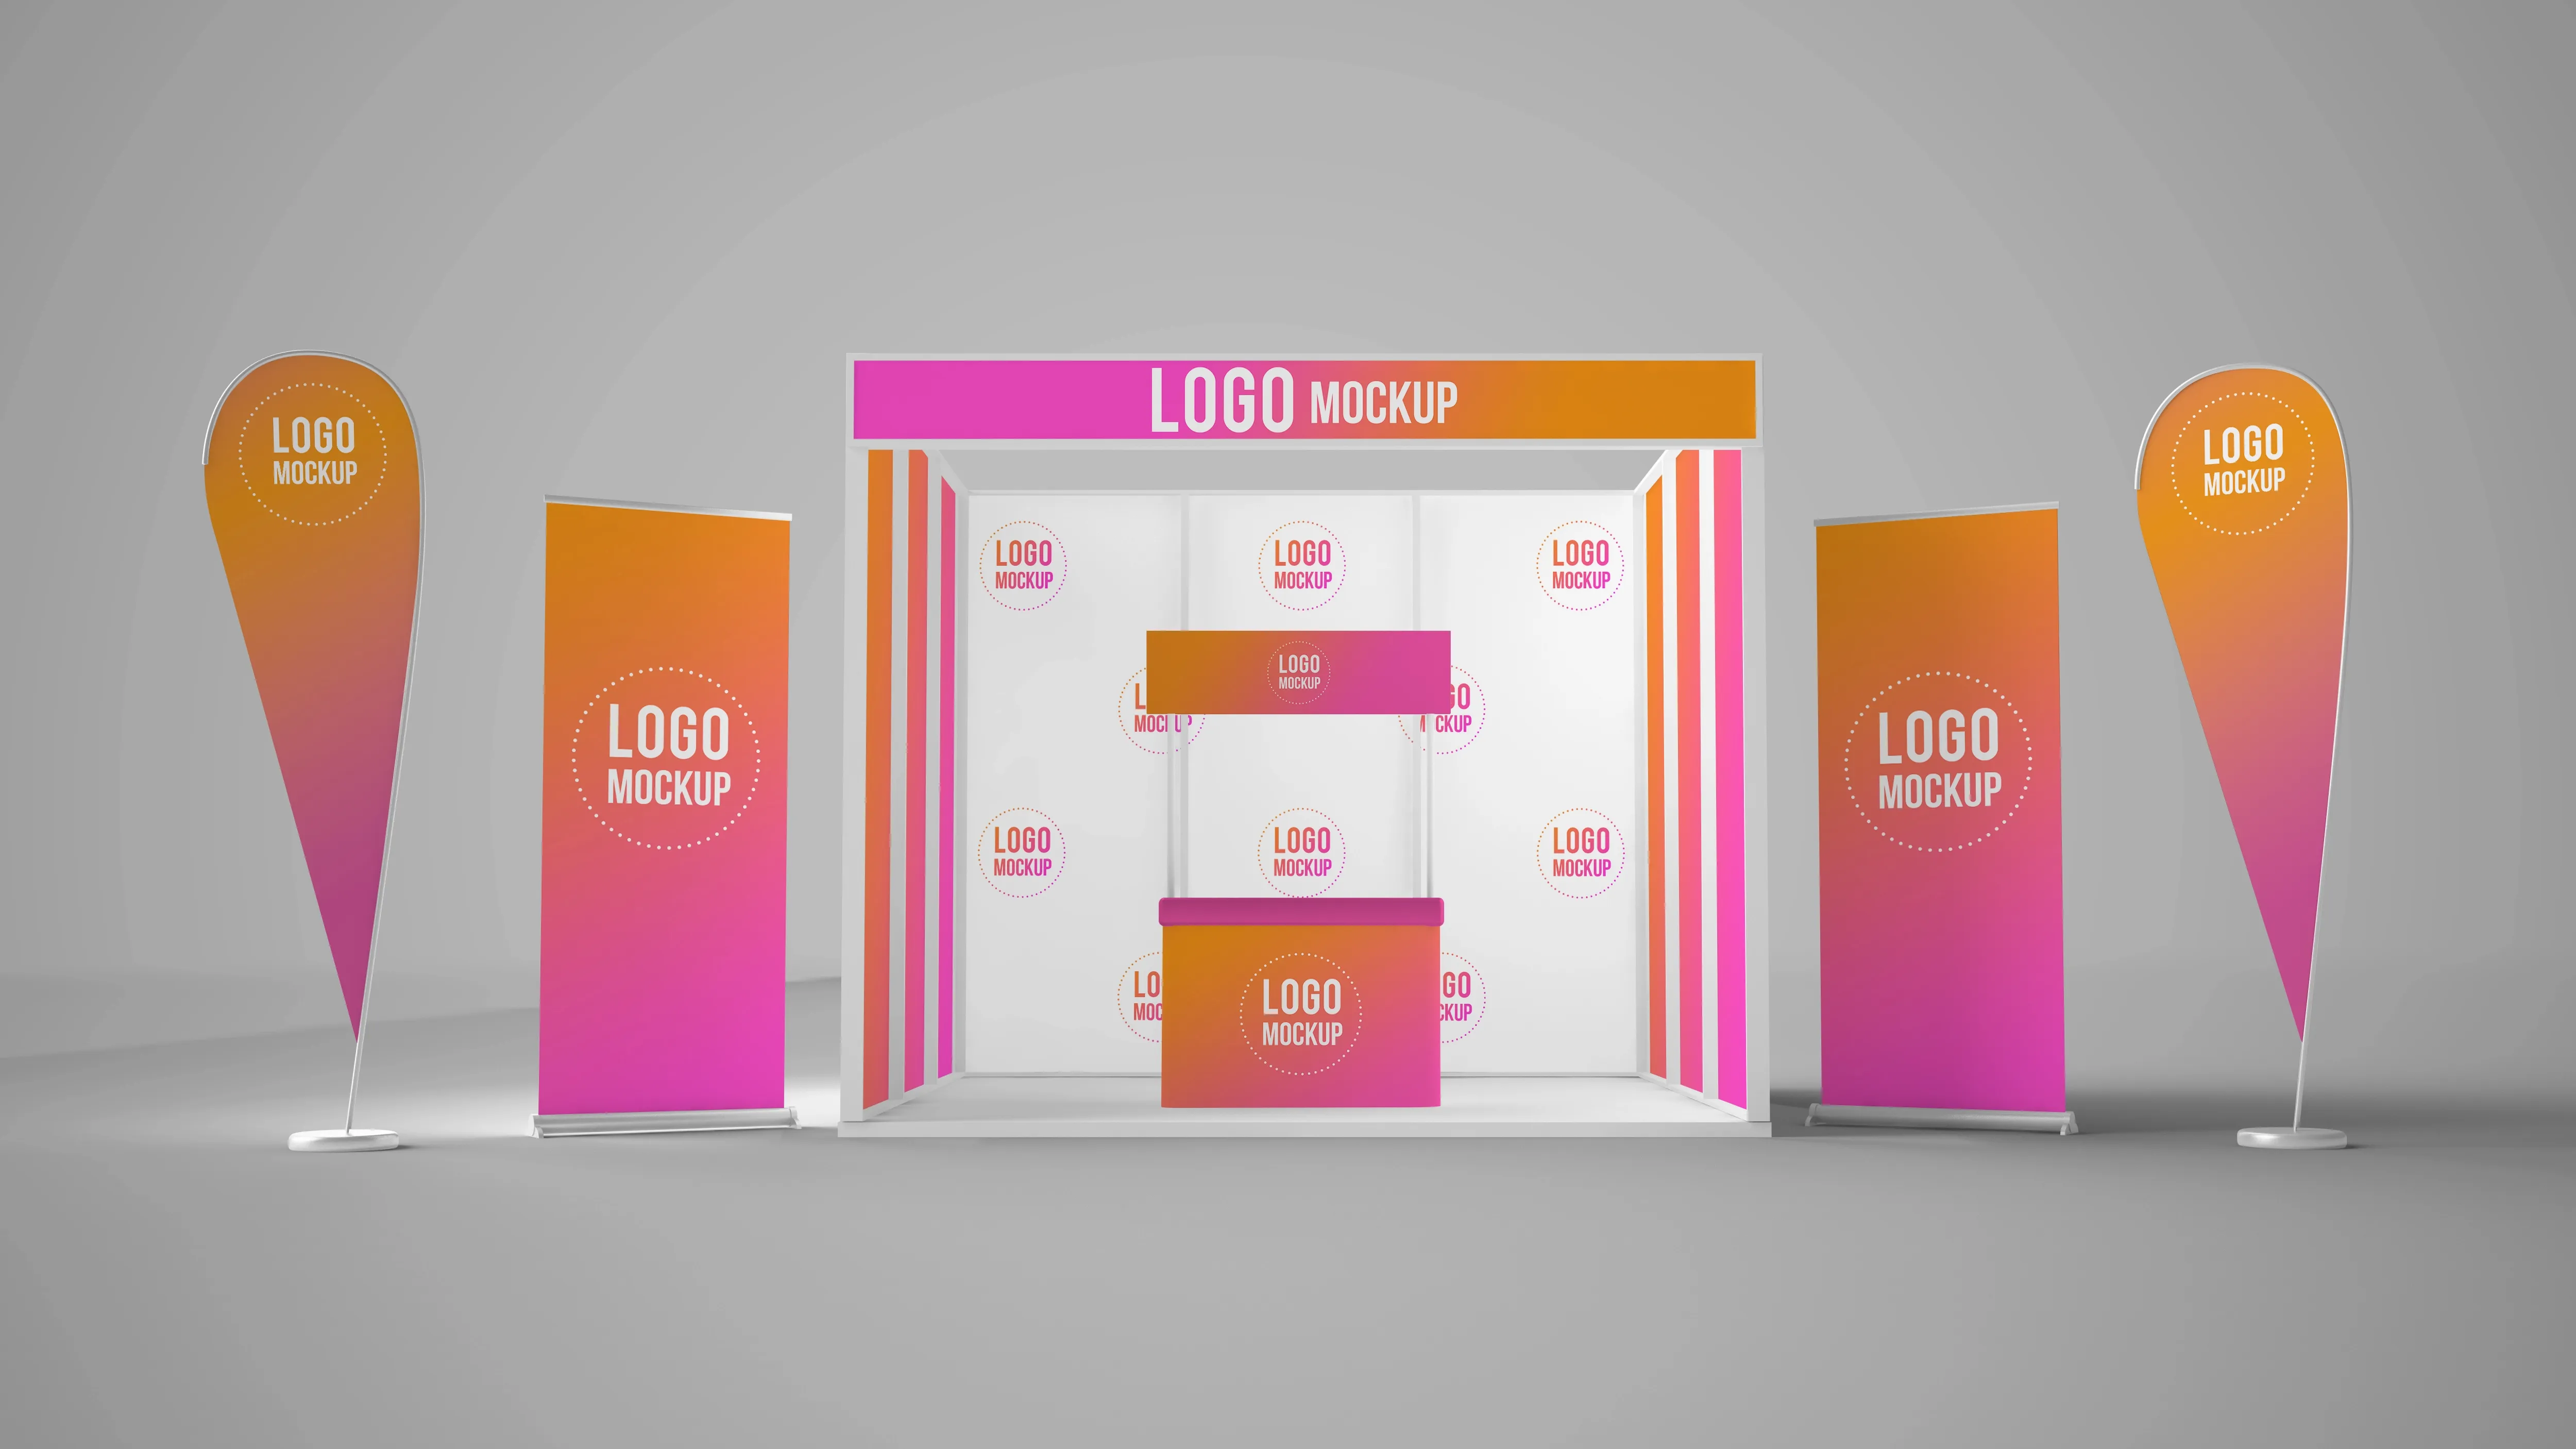 Exhibition booth mockup with banners and rollups